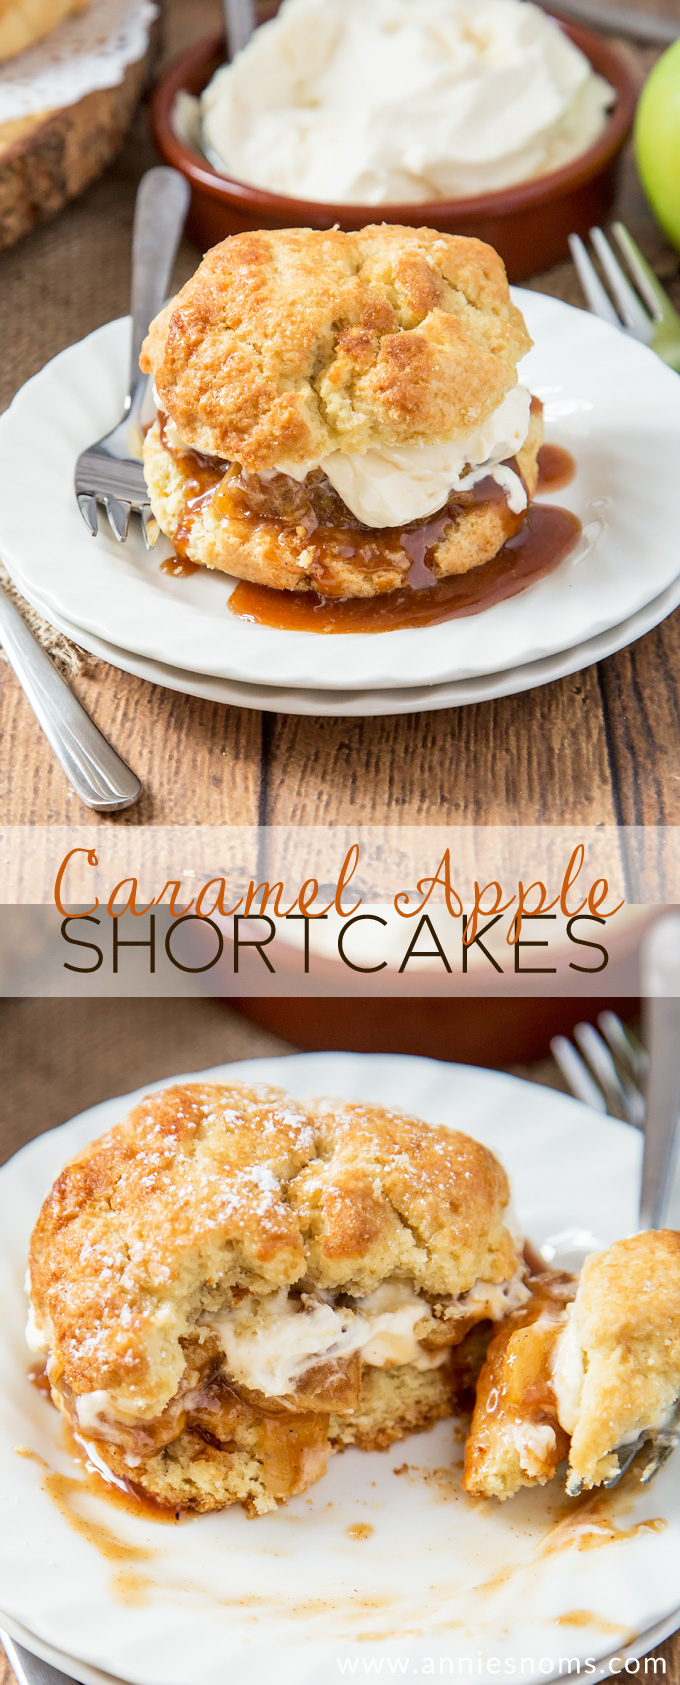 Flaky, buttery shortcakes filled with tender apples cooked in caramel sauce and topped with sweetened whipped cream. One seriously decadent, yet addictive dessert!